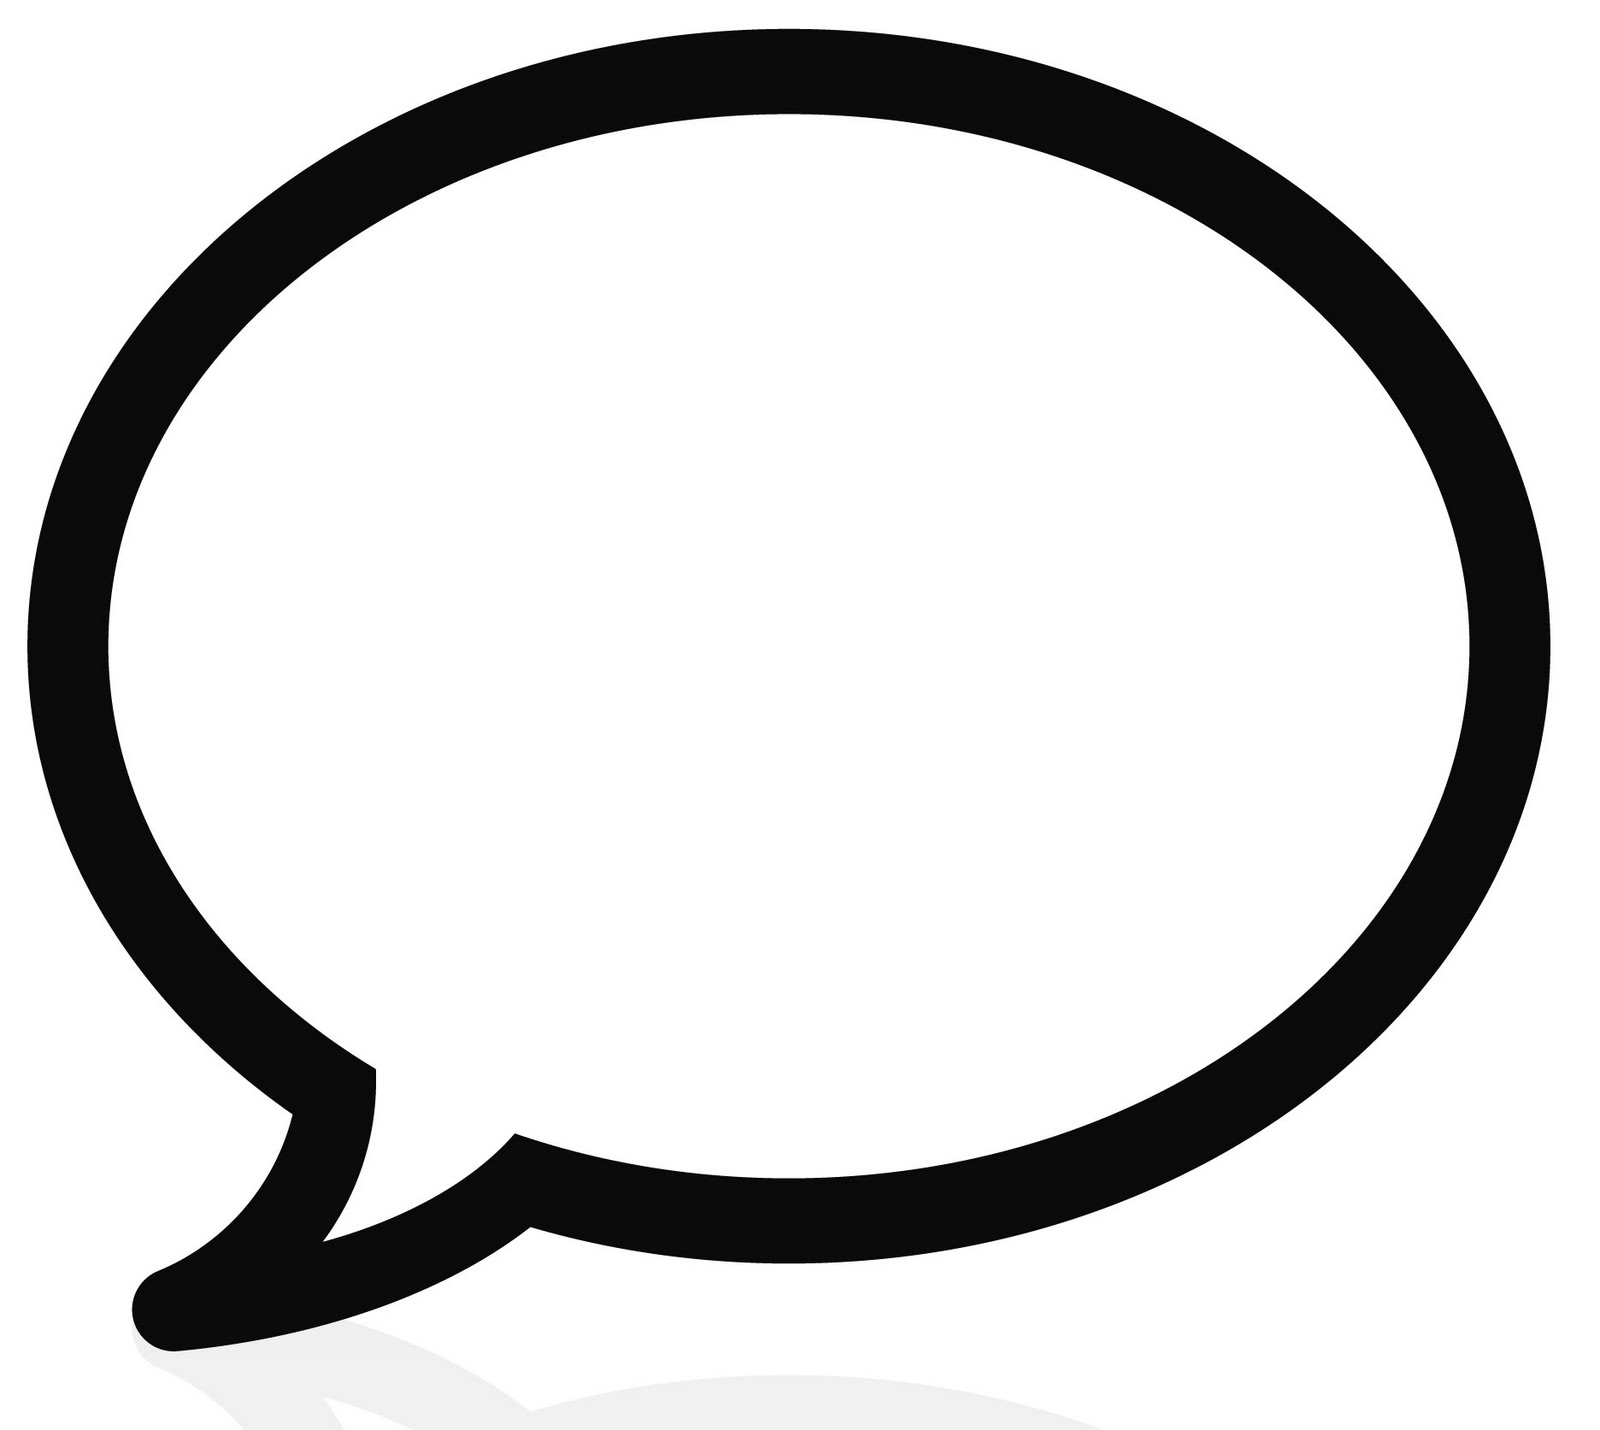 Speech Bubble With Lines Template - ClipArt Best